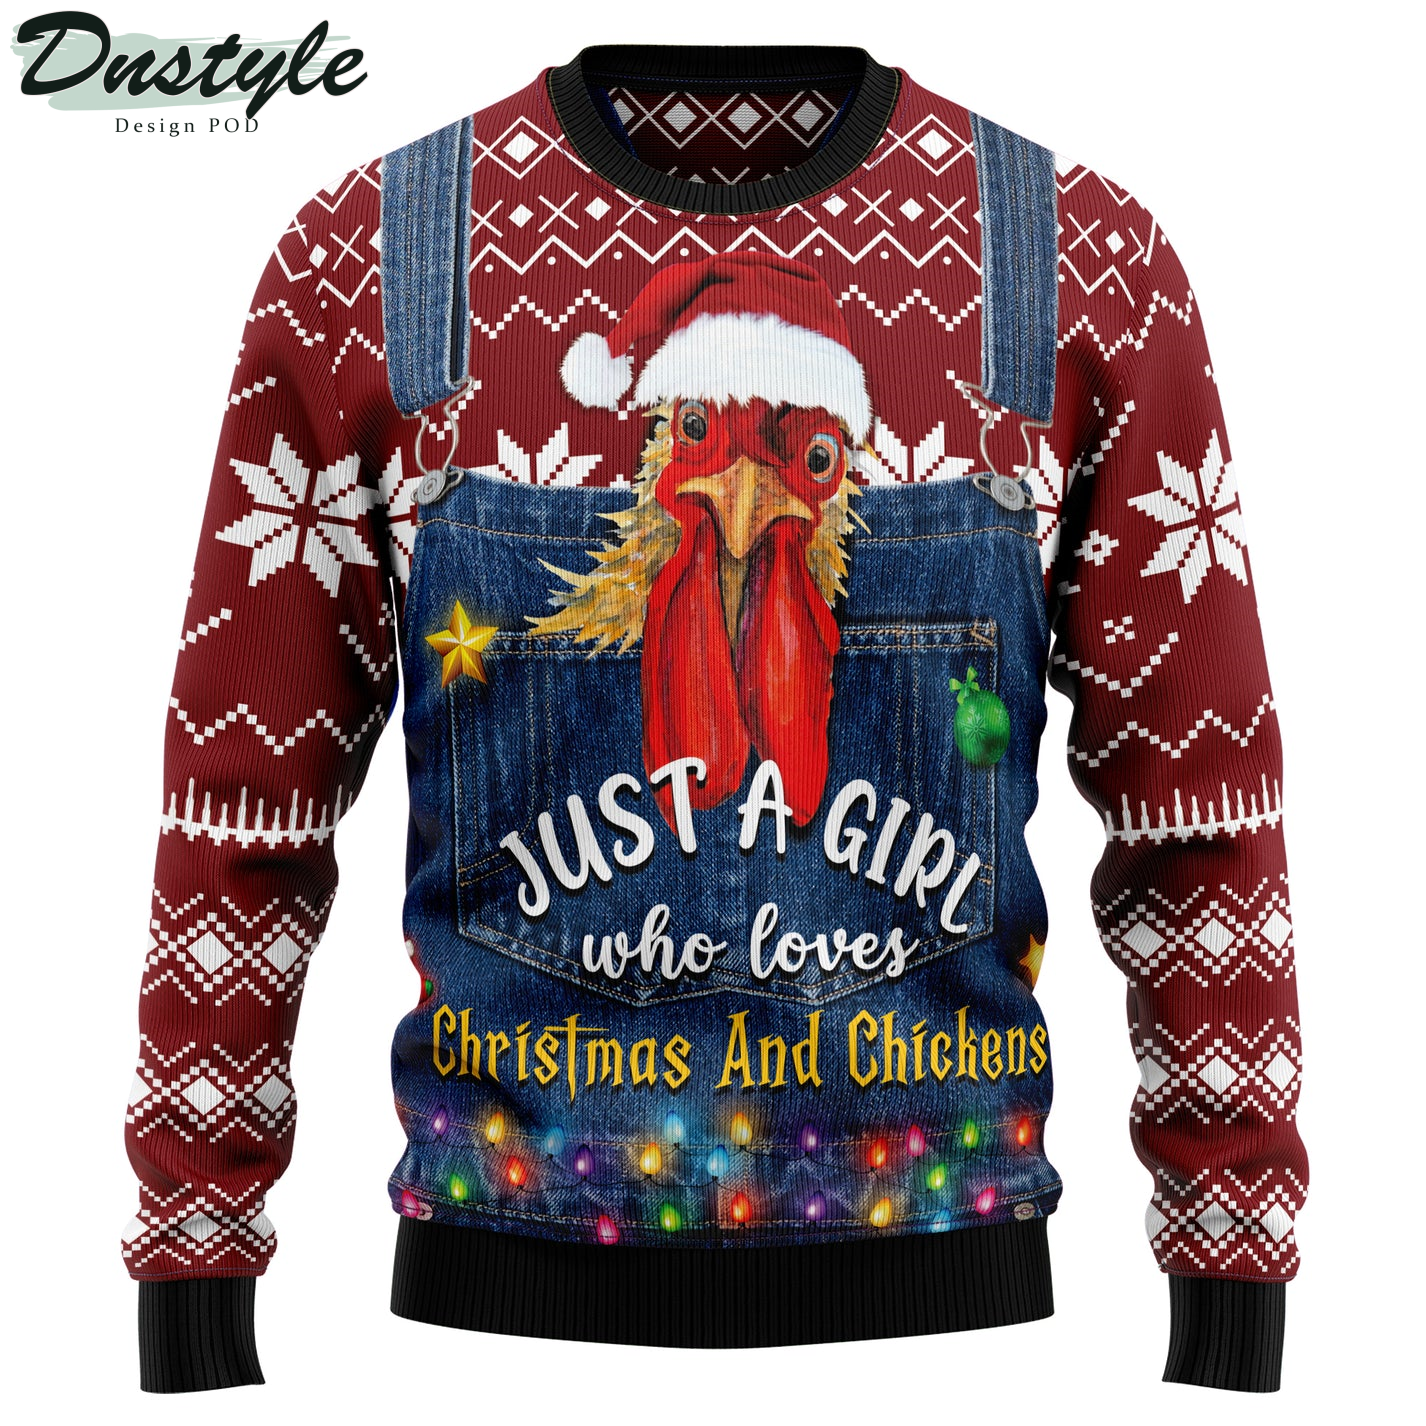 Just A Girl Who Loves Christmas And Chickens UglySweater